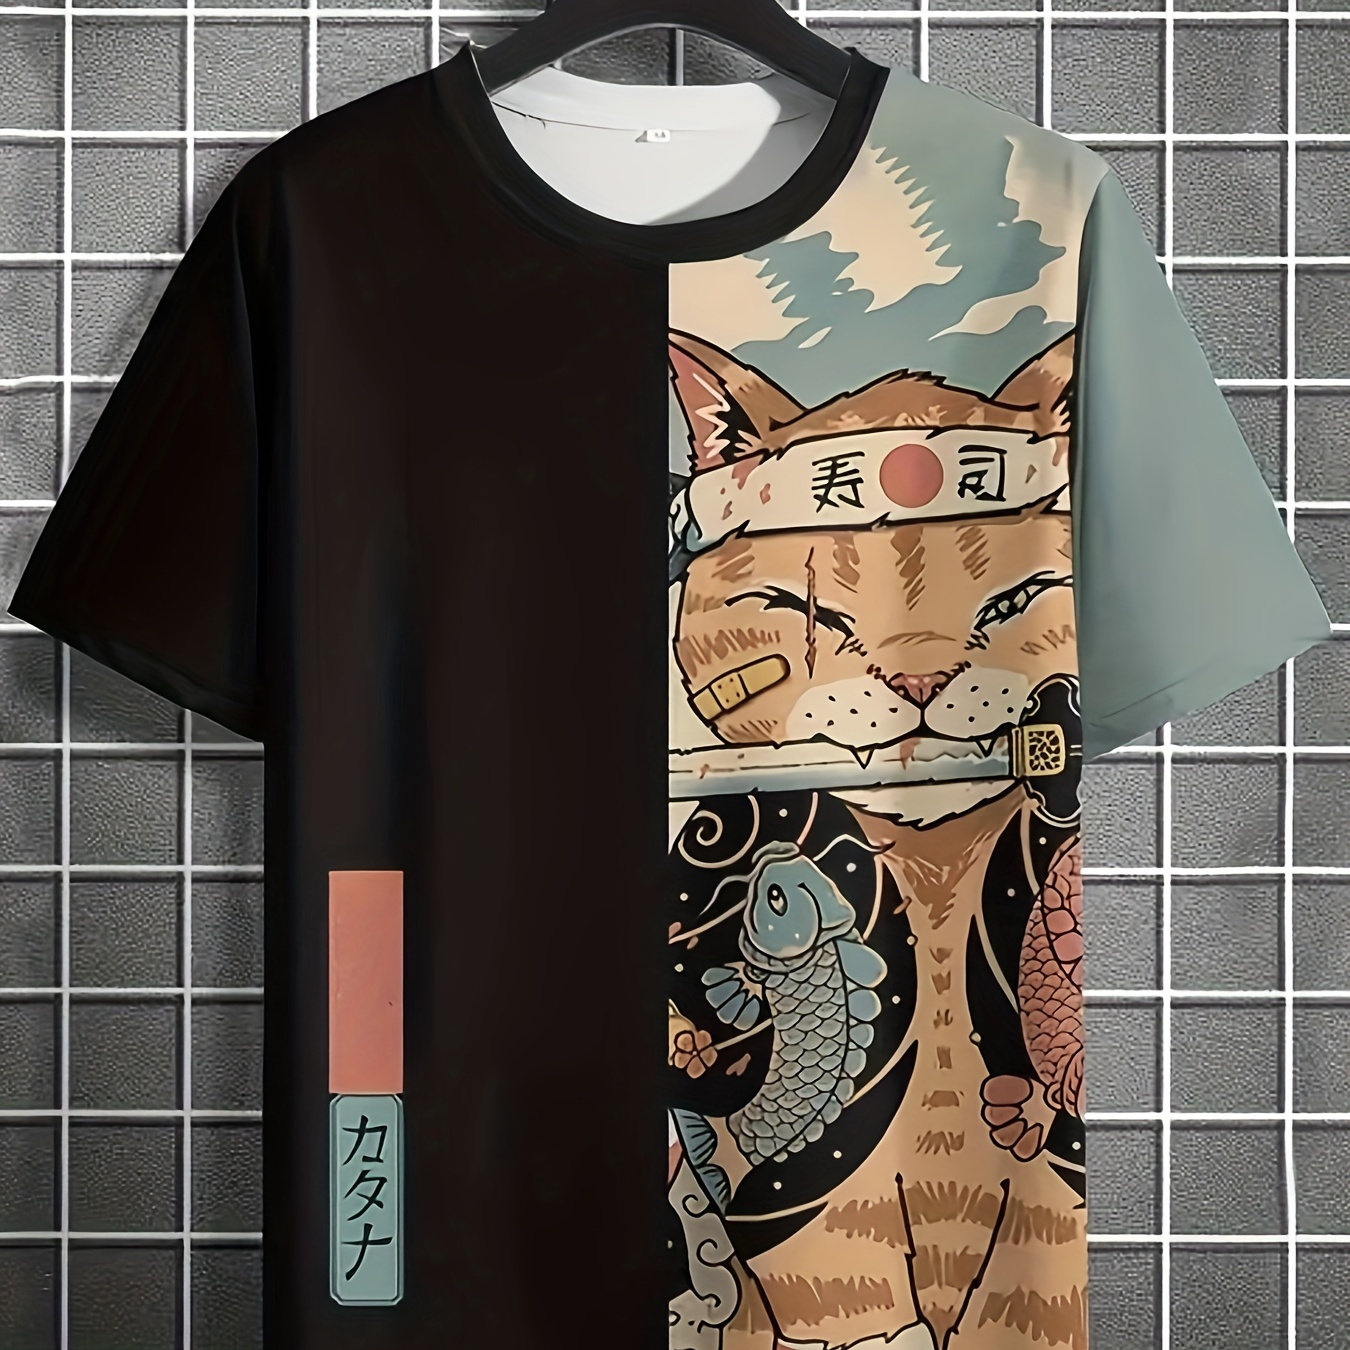 

Retro Comic Style Cat Samurai Pattern T-shirt With Short Sleeve And Crew Neck, Trendy And Chic Tops For Men's Summer Leisurewear